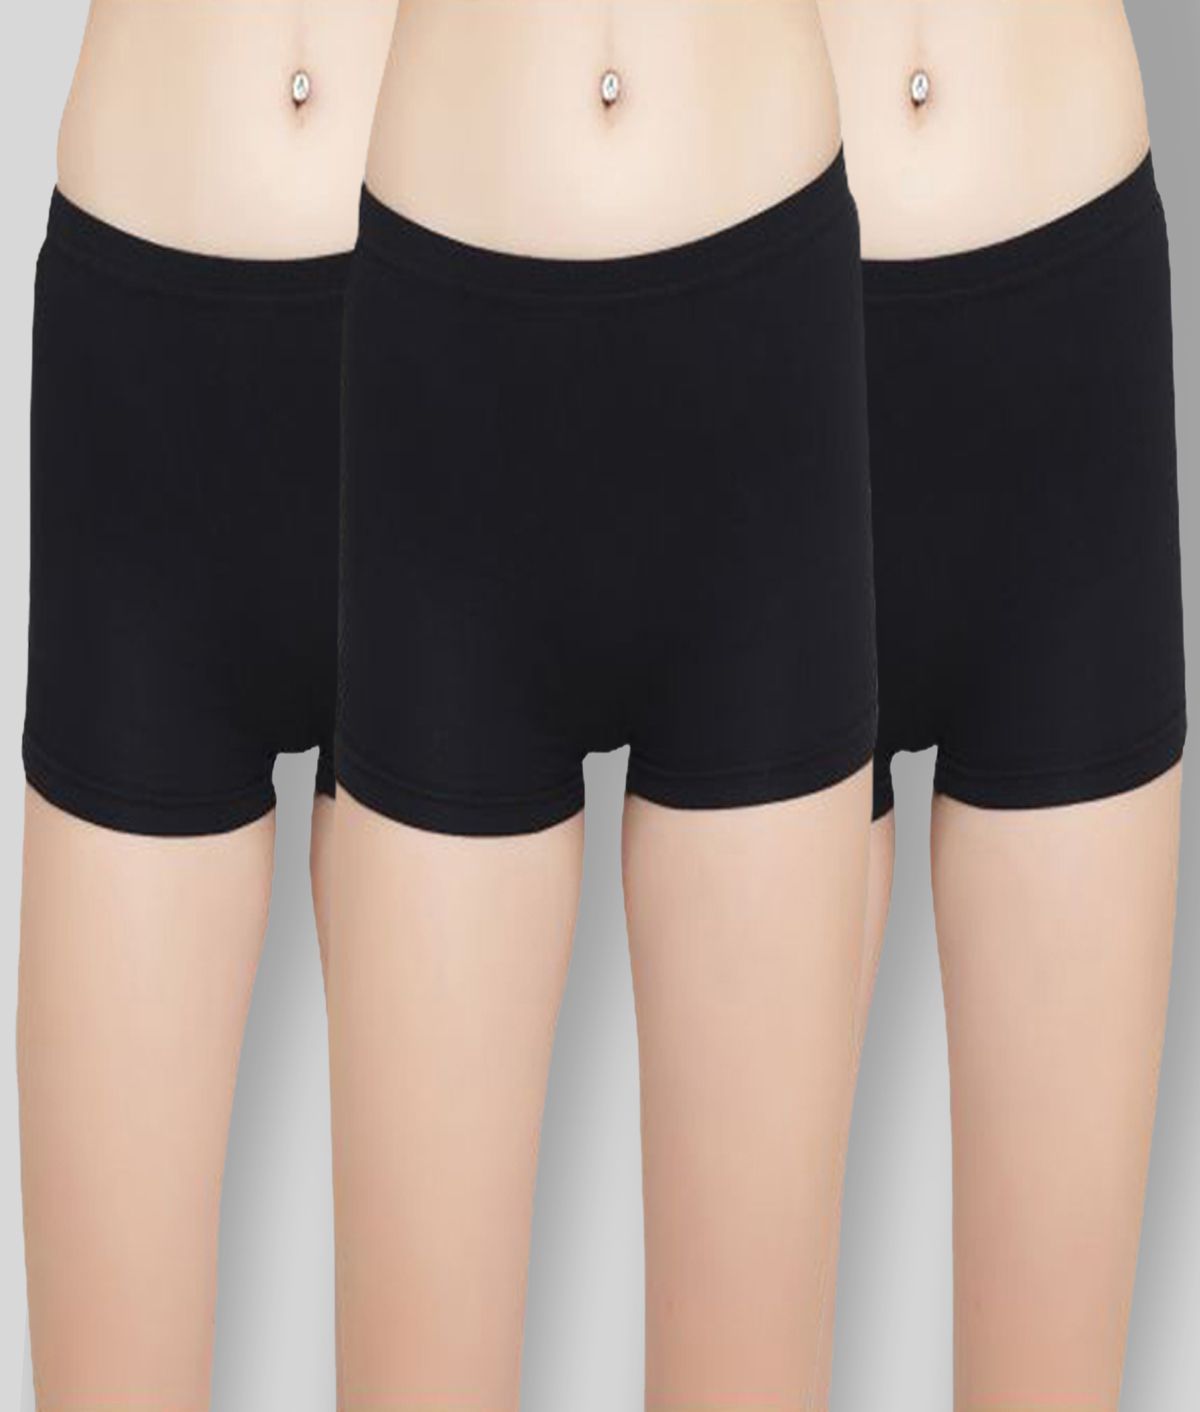     			Leading Lady - Black Cotton Solid Women's Boy Shorts ( Pack of 3 )